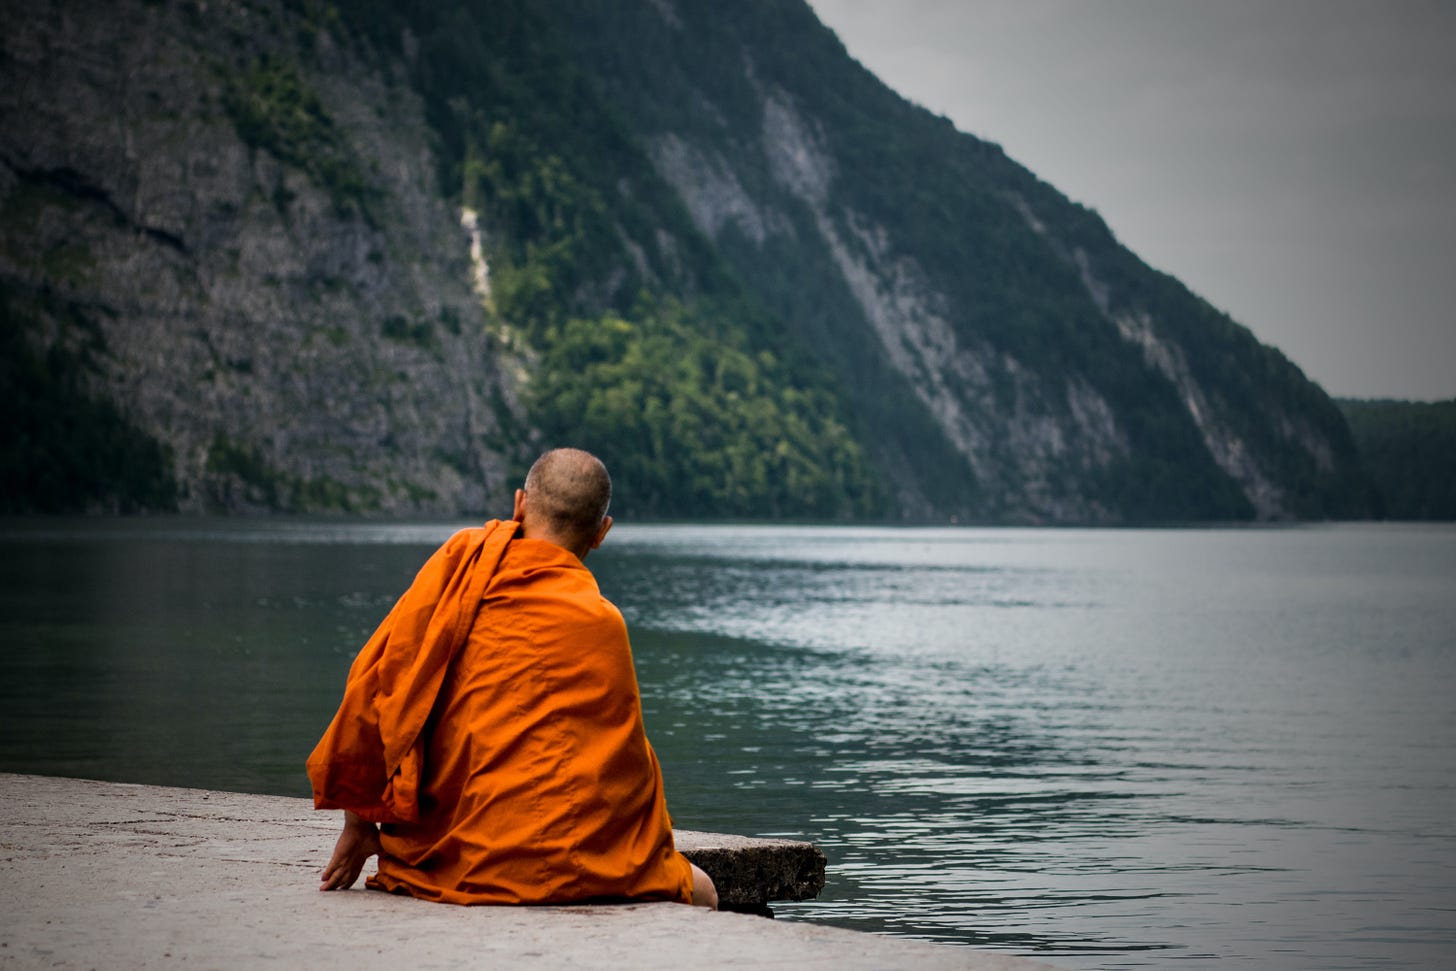 A monk, sitting by a lake. He looks over to the mountainside.